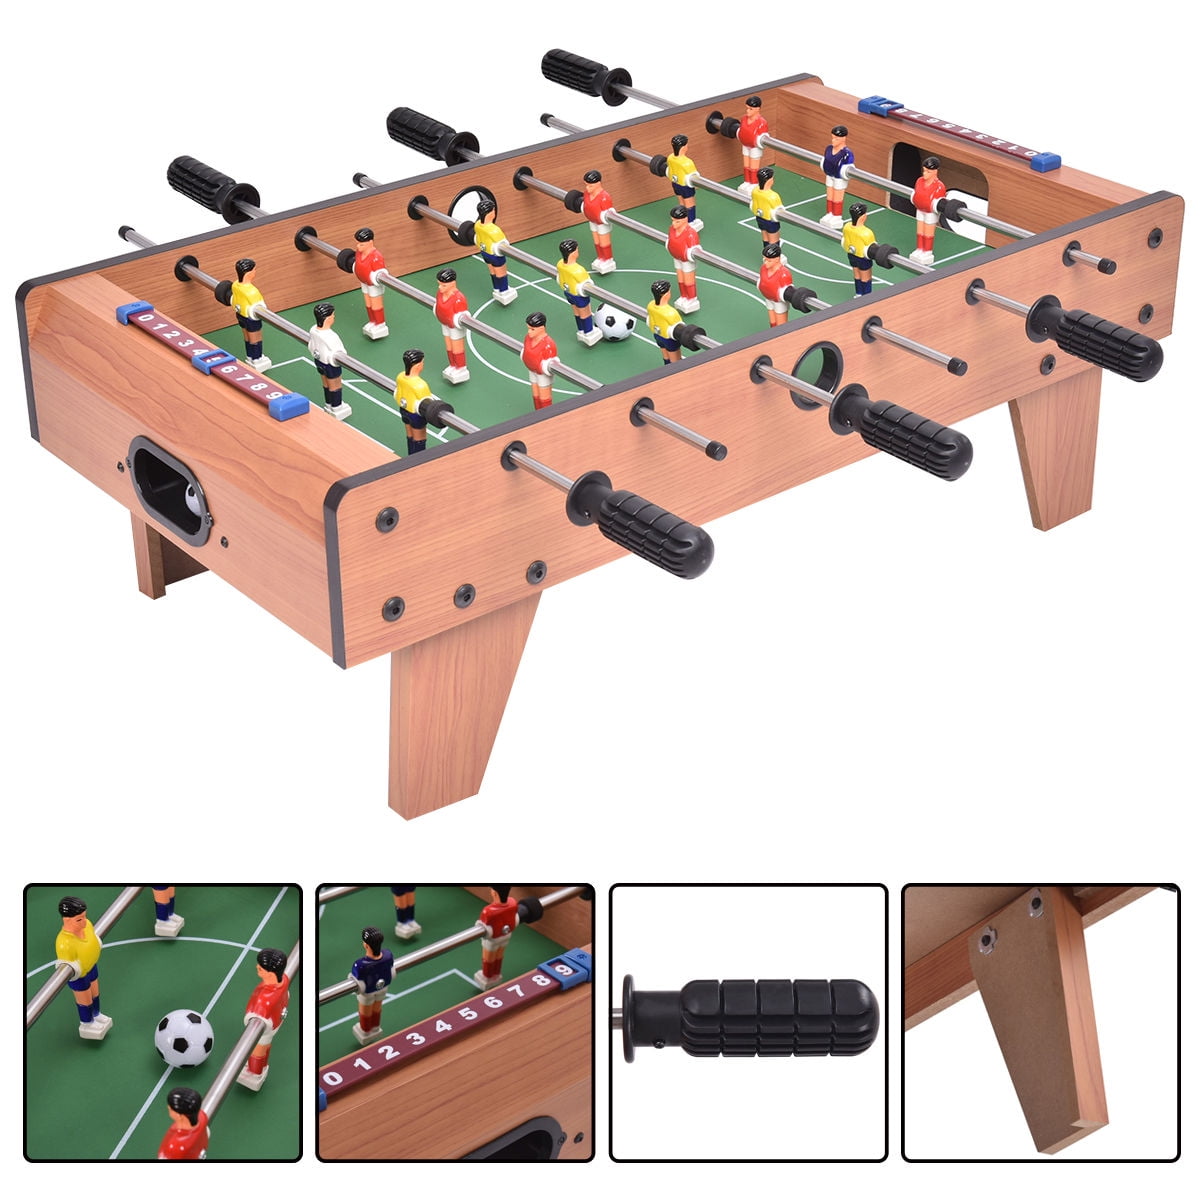 Foosball Table Soccer Football Indoor Family Game Sports Kids Boys Toy Gift 